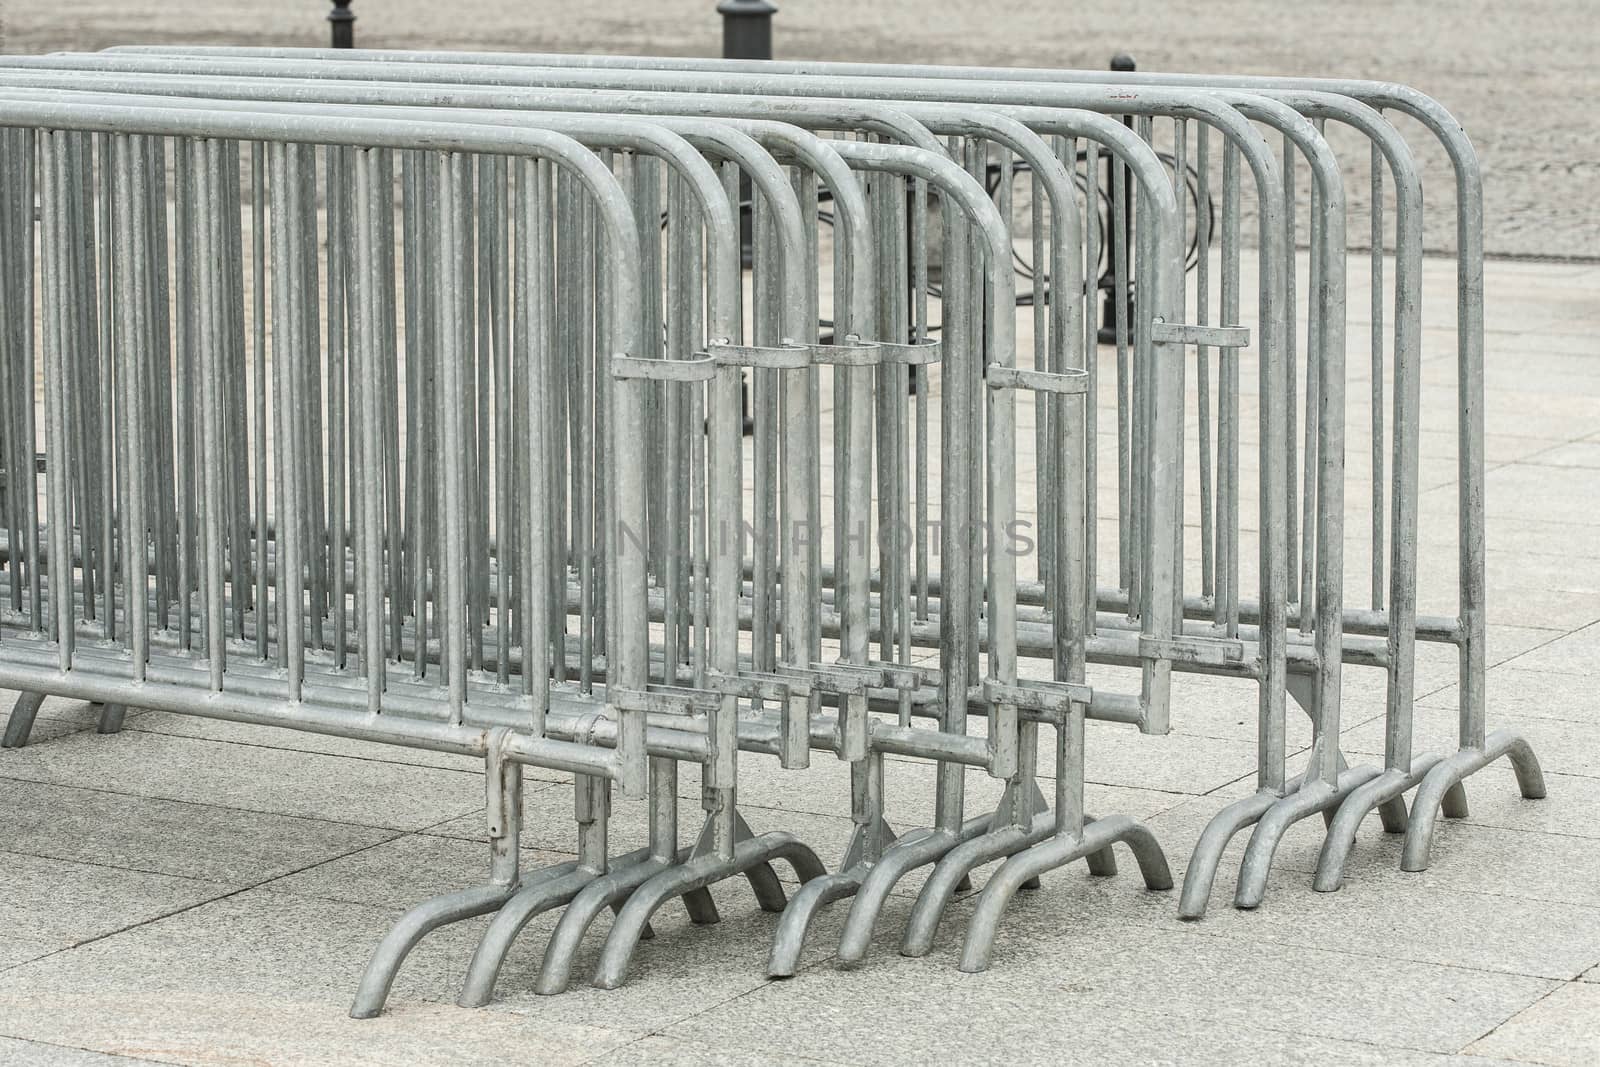 Metal barriers separating people at the concert, grouped into deployment.